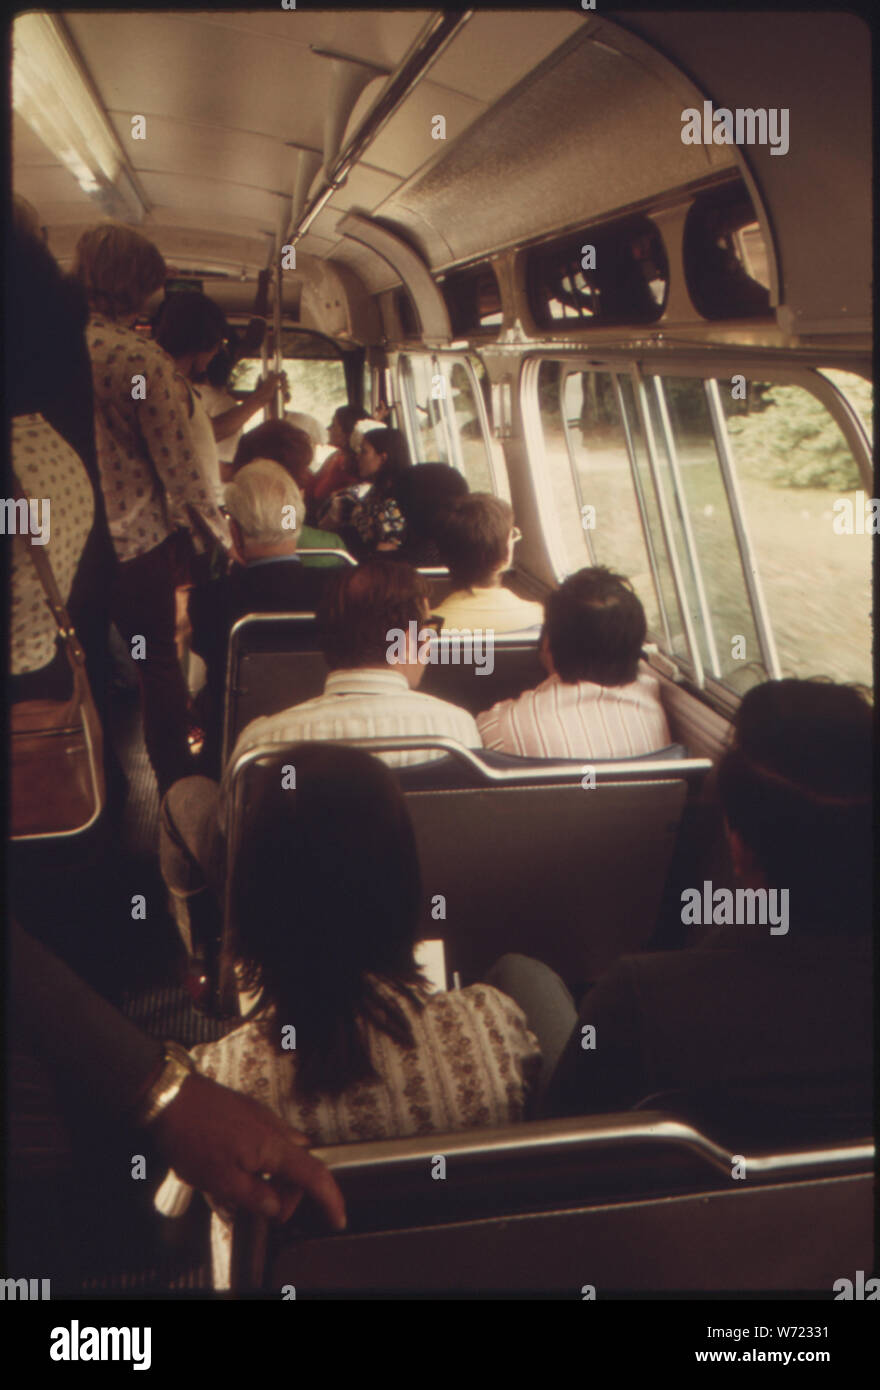 COMMUTERS ABOARD A METROPOLITAN ATLANTA RAPID TRANSIT AUTHORITY (MARTA) BUS IN ATLANTA, GEORGIA. IN 1974 THE SYSTEM CARRIED 73,727,000 PASSENGERS, AN INCREASE OF 27 PERCENT FROM 1970. ALMOST 90 PERCENT OF THE INCREASE CAME FROM THE SECTOR OF POPULATION WHO HAD NOT RIDDEN THE BUS BEFORE. THEY WERE ATTRACTED BY A COMBINATION OF A FARE DECREASE FROM 40 TO 15 CENTS, NEW BUSES, NEW ROUTES, NIGHT SERVICE, PASSENGER WAITING SHELTERS AND FRINGE PARKING Stock Photo